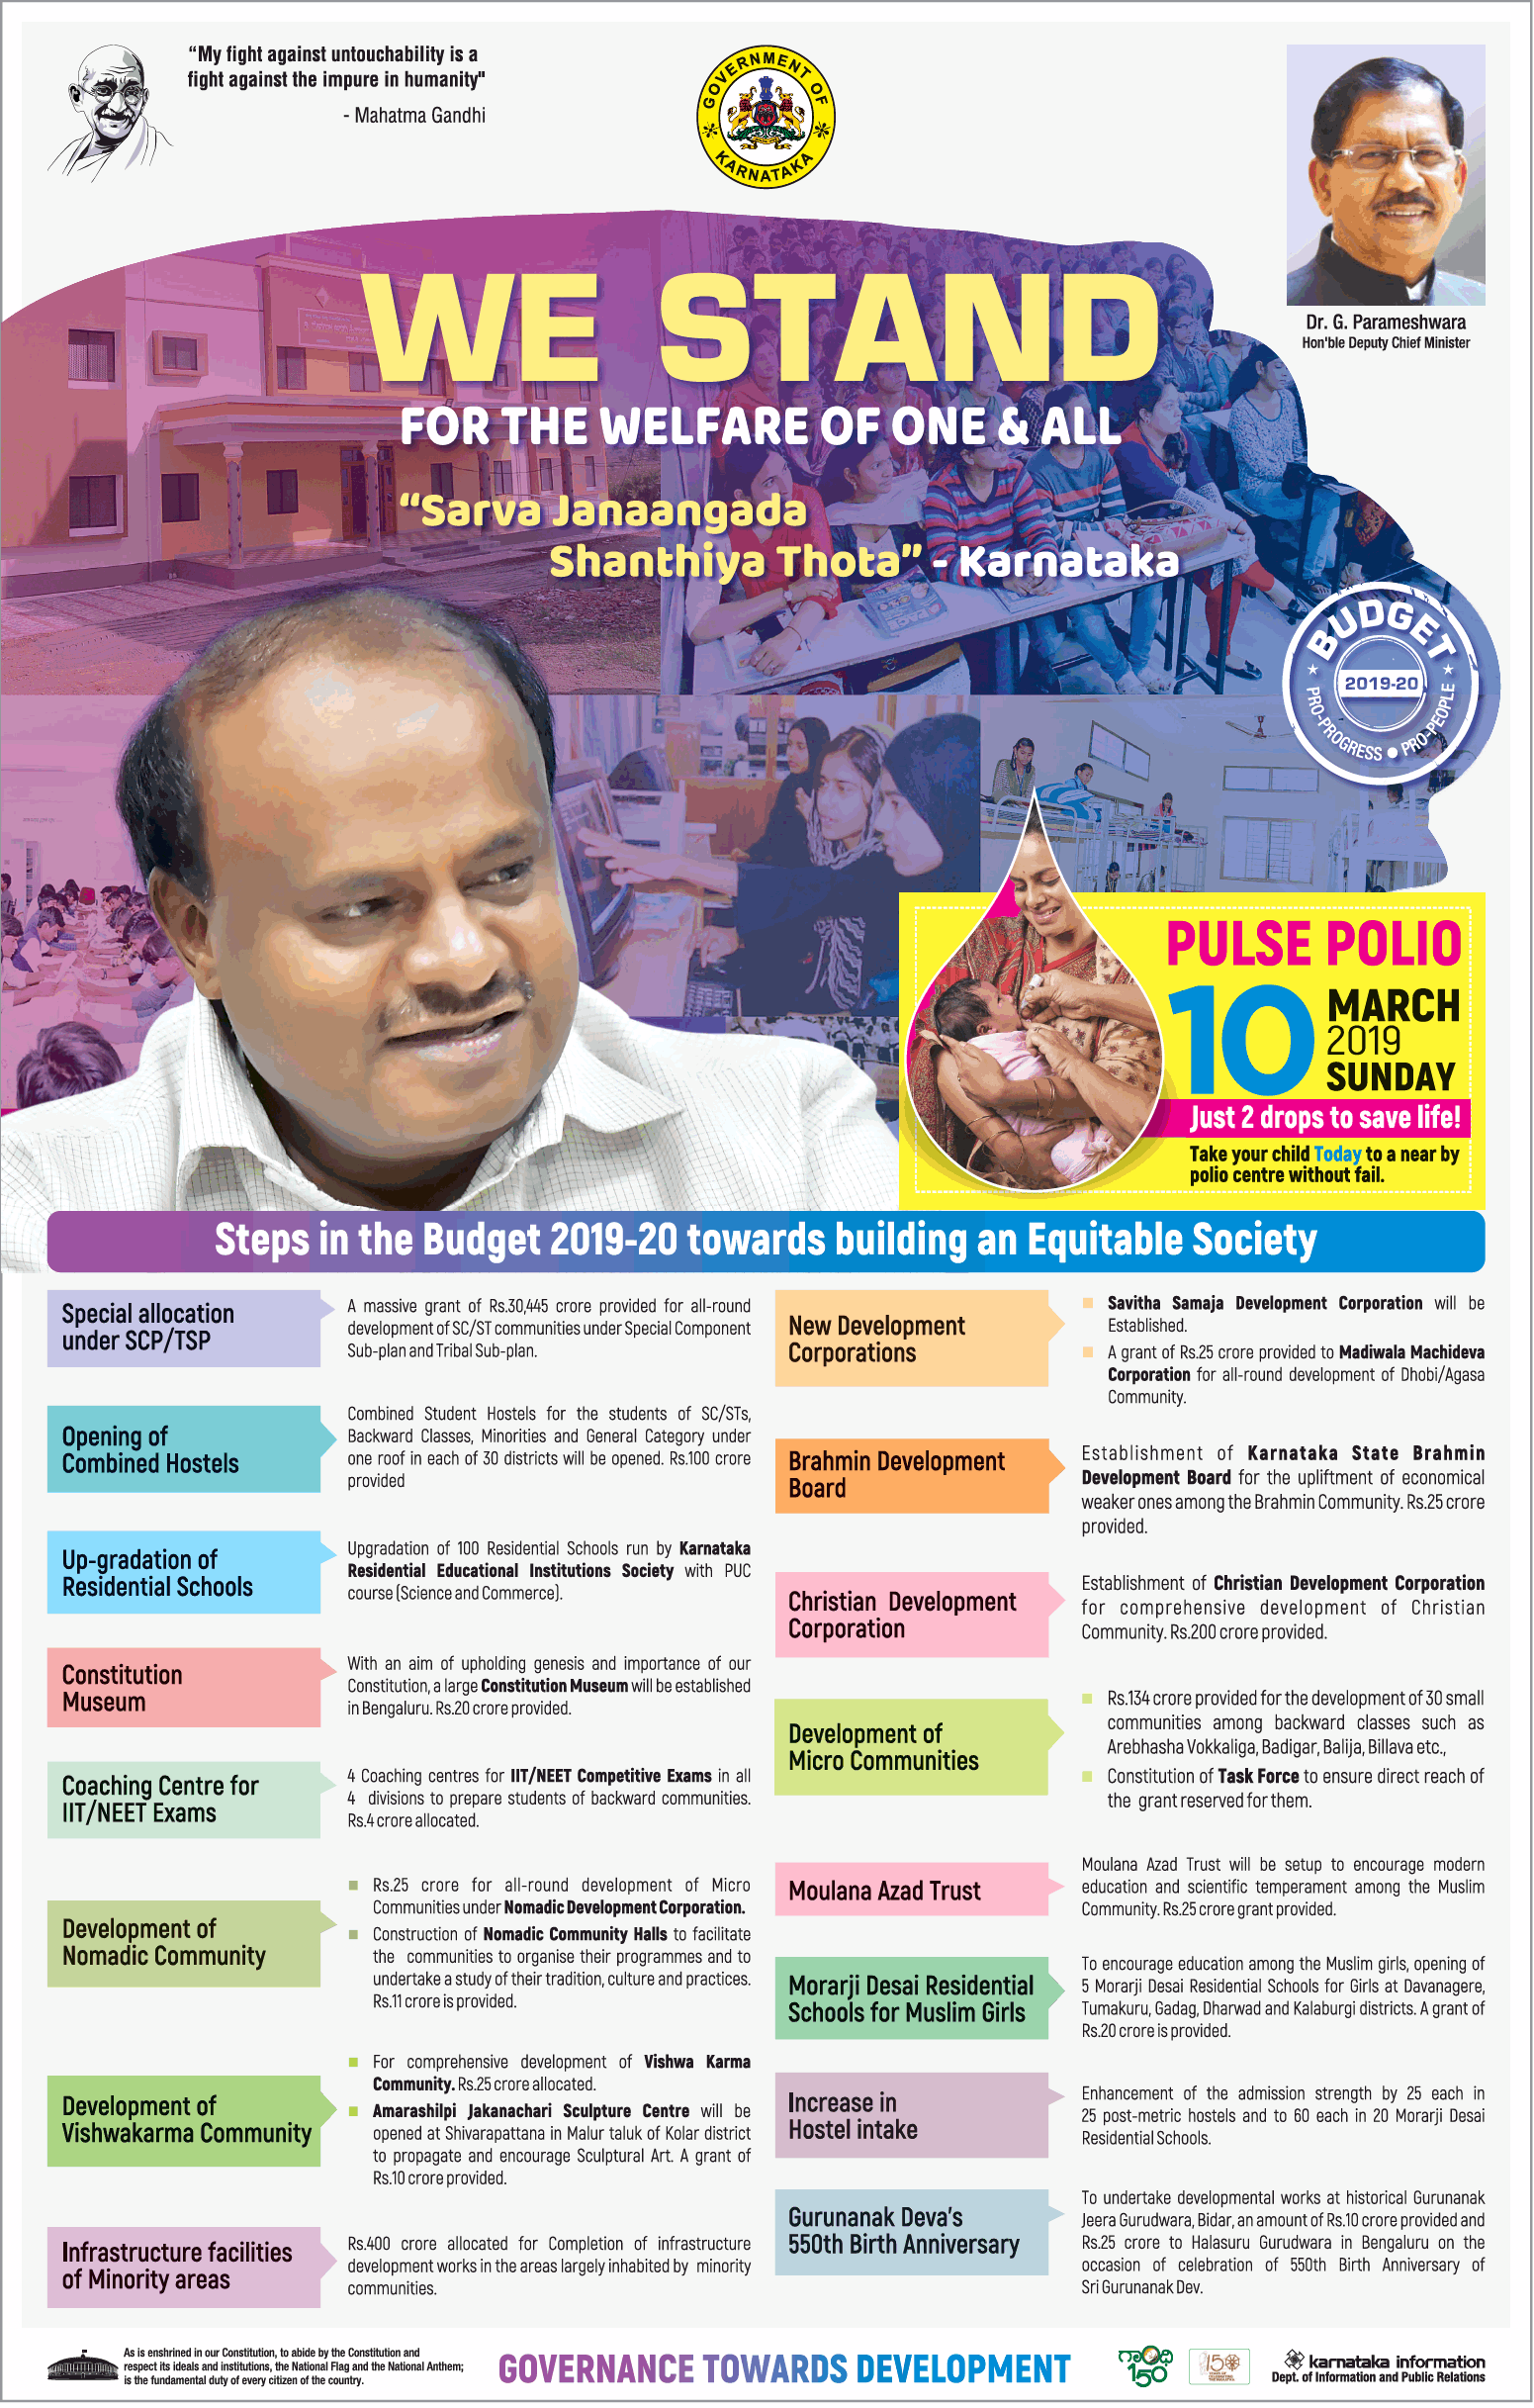 governemnt-of-karnataka-we-stand-for-the-welfare-of-one-and-all-ad-times-of-india-bangalore-10-03-2019.png